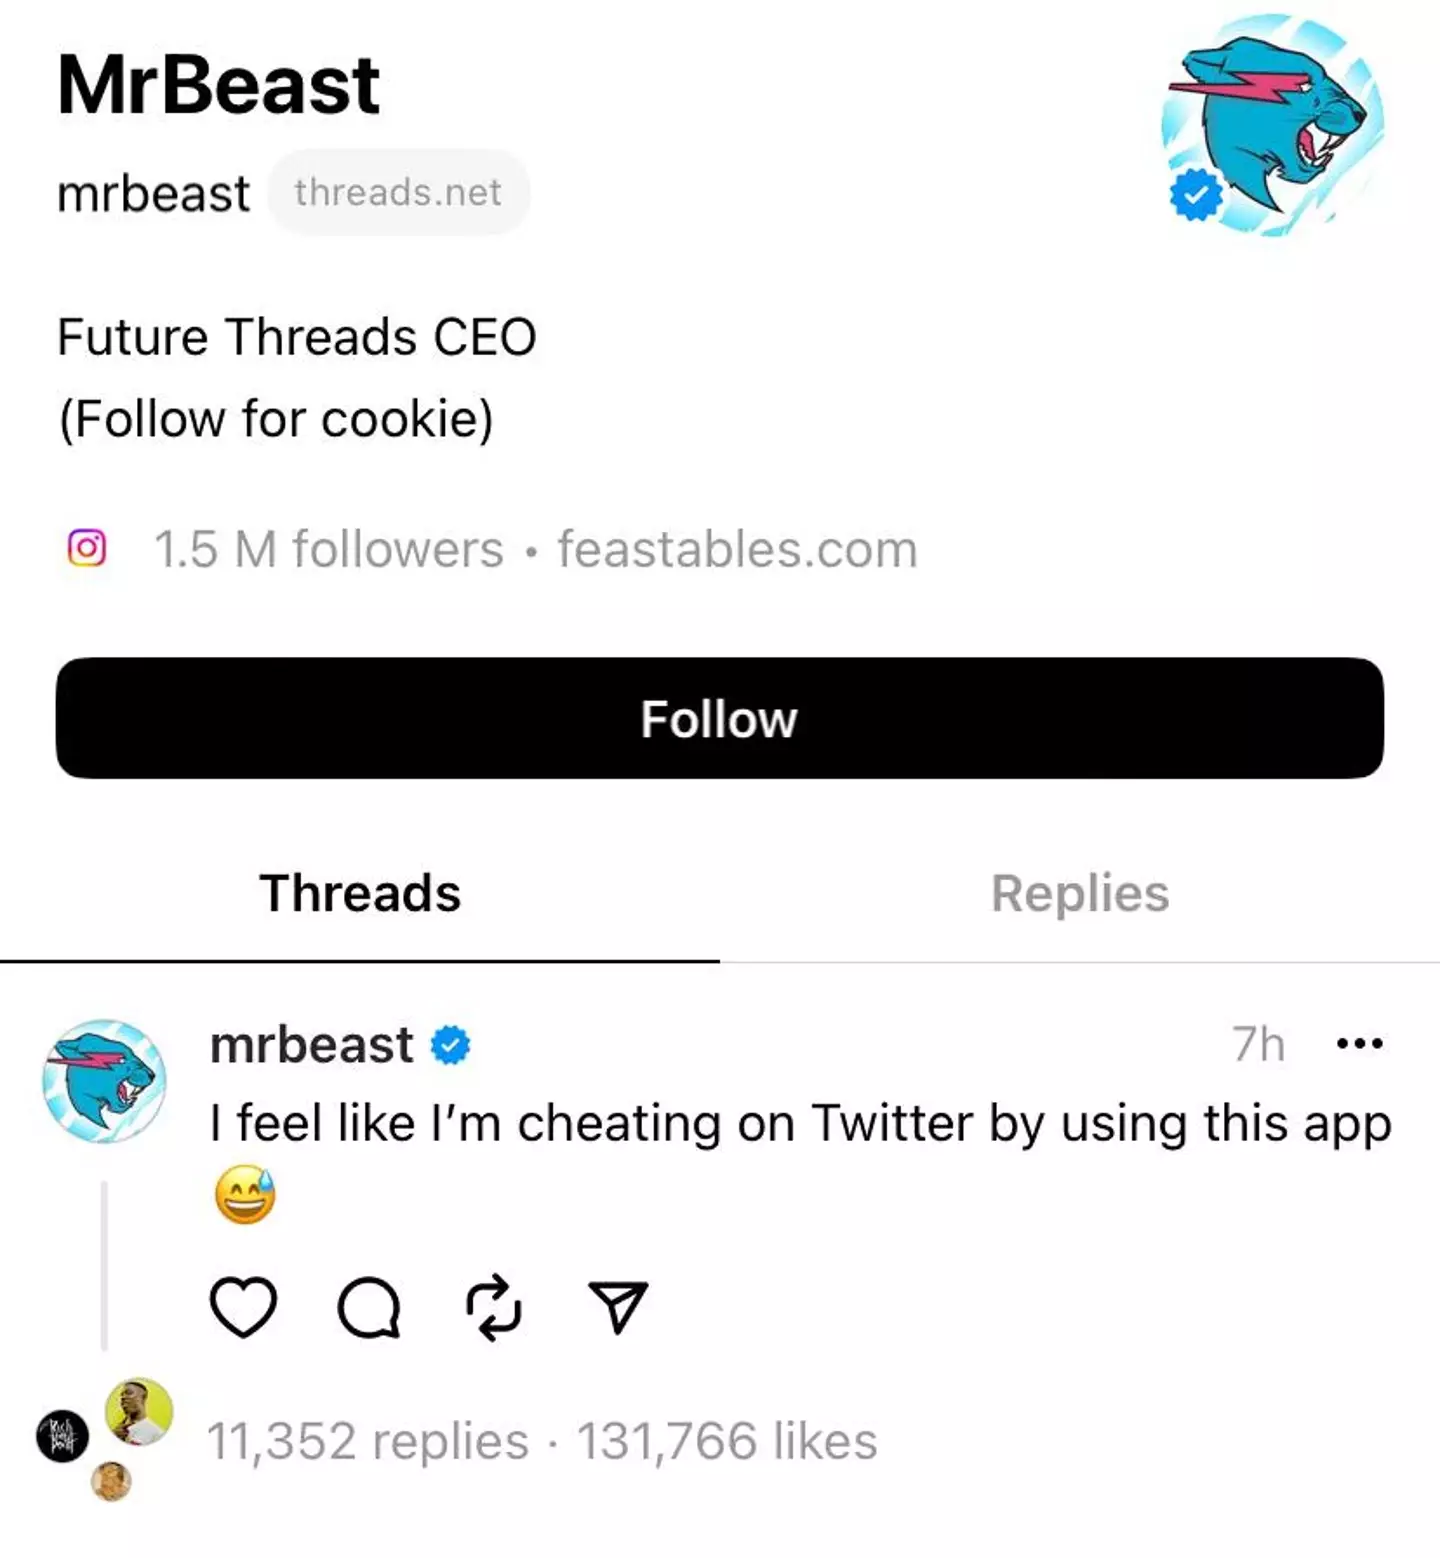 MrBeast is the first person on Threads to hit a million followers, and he's already well past that.